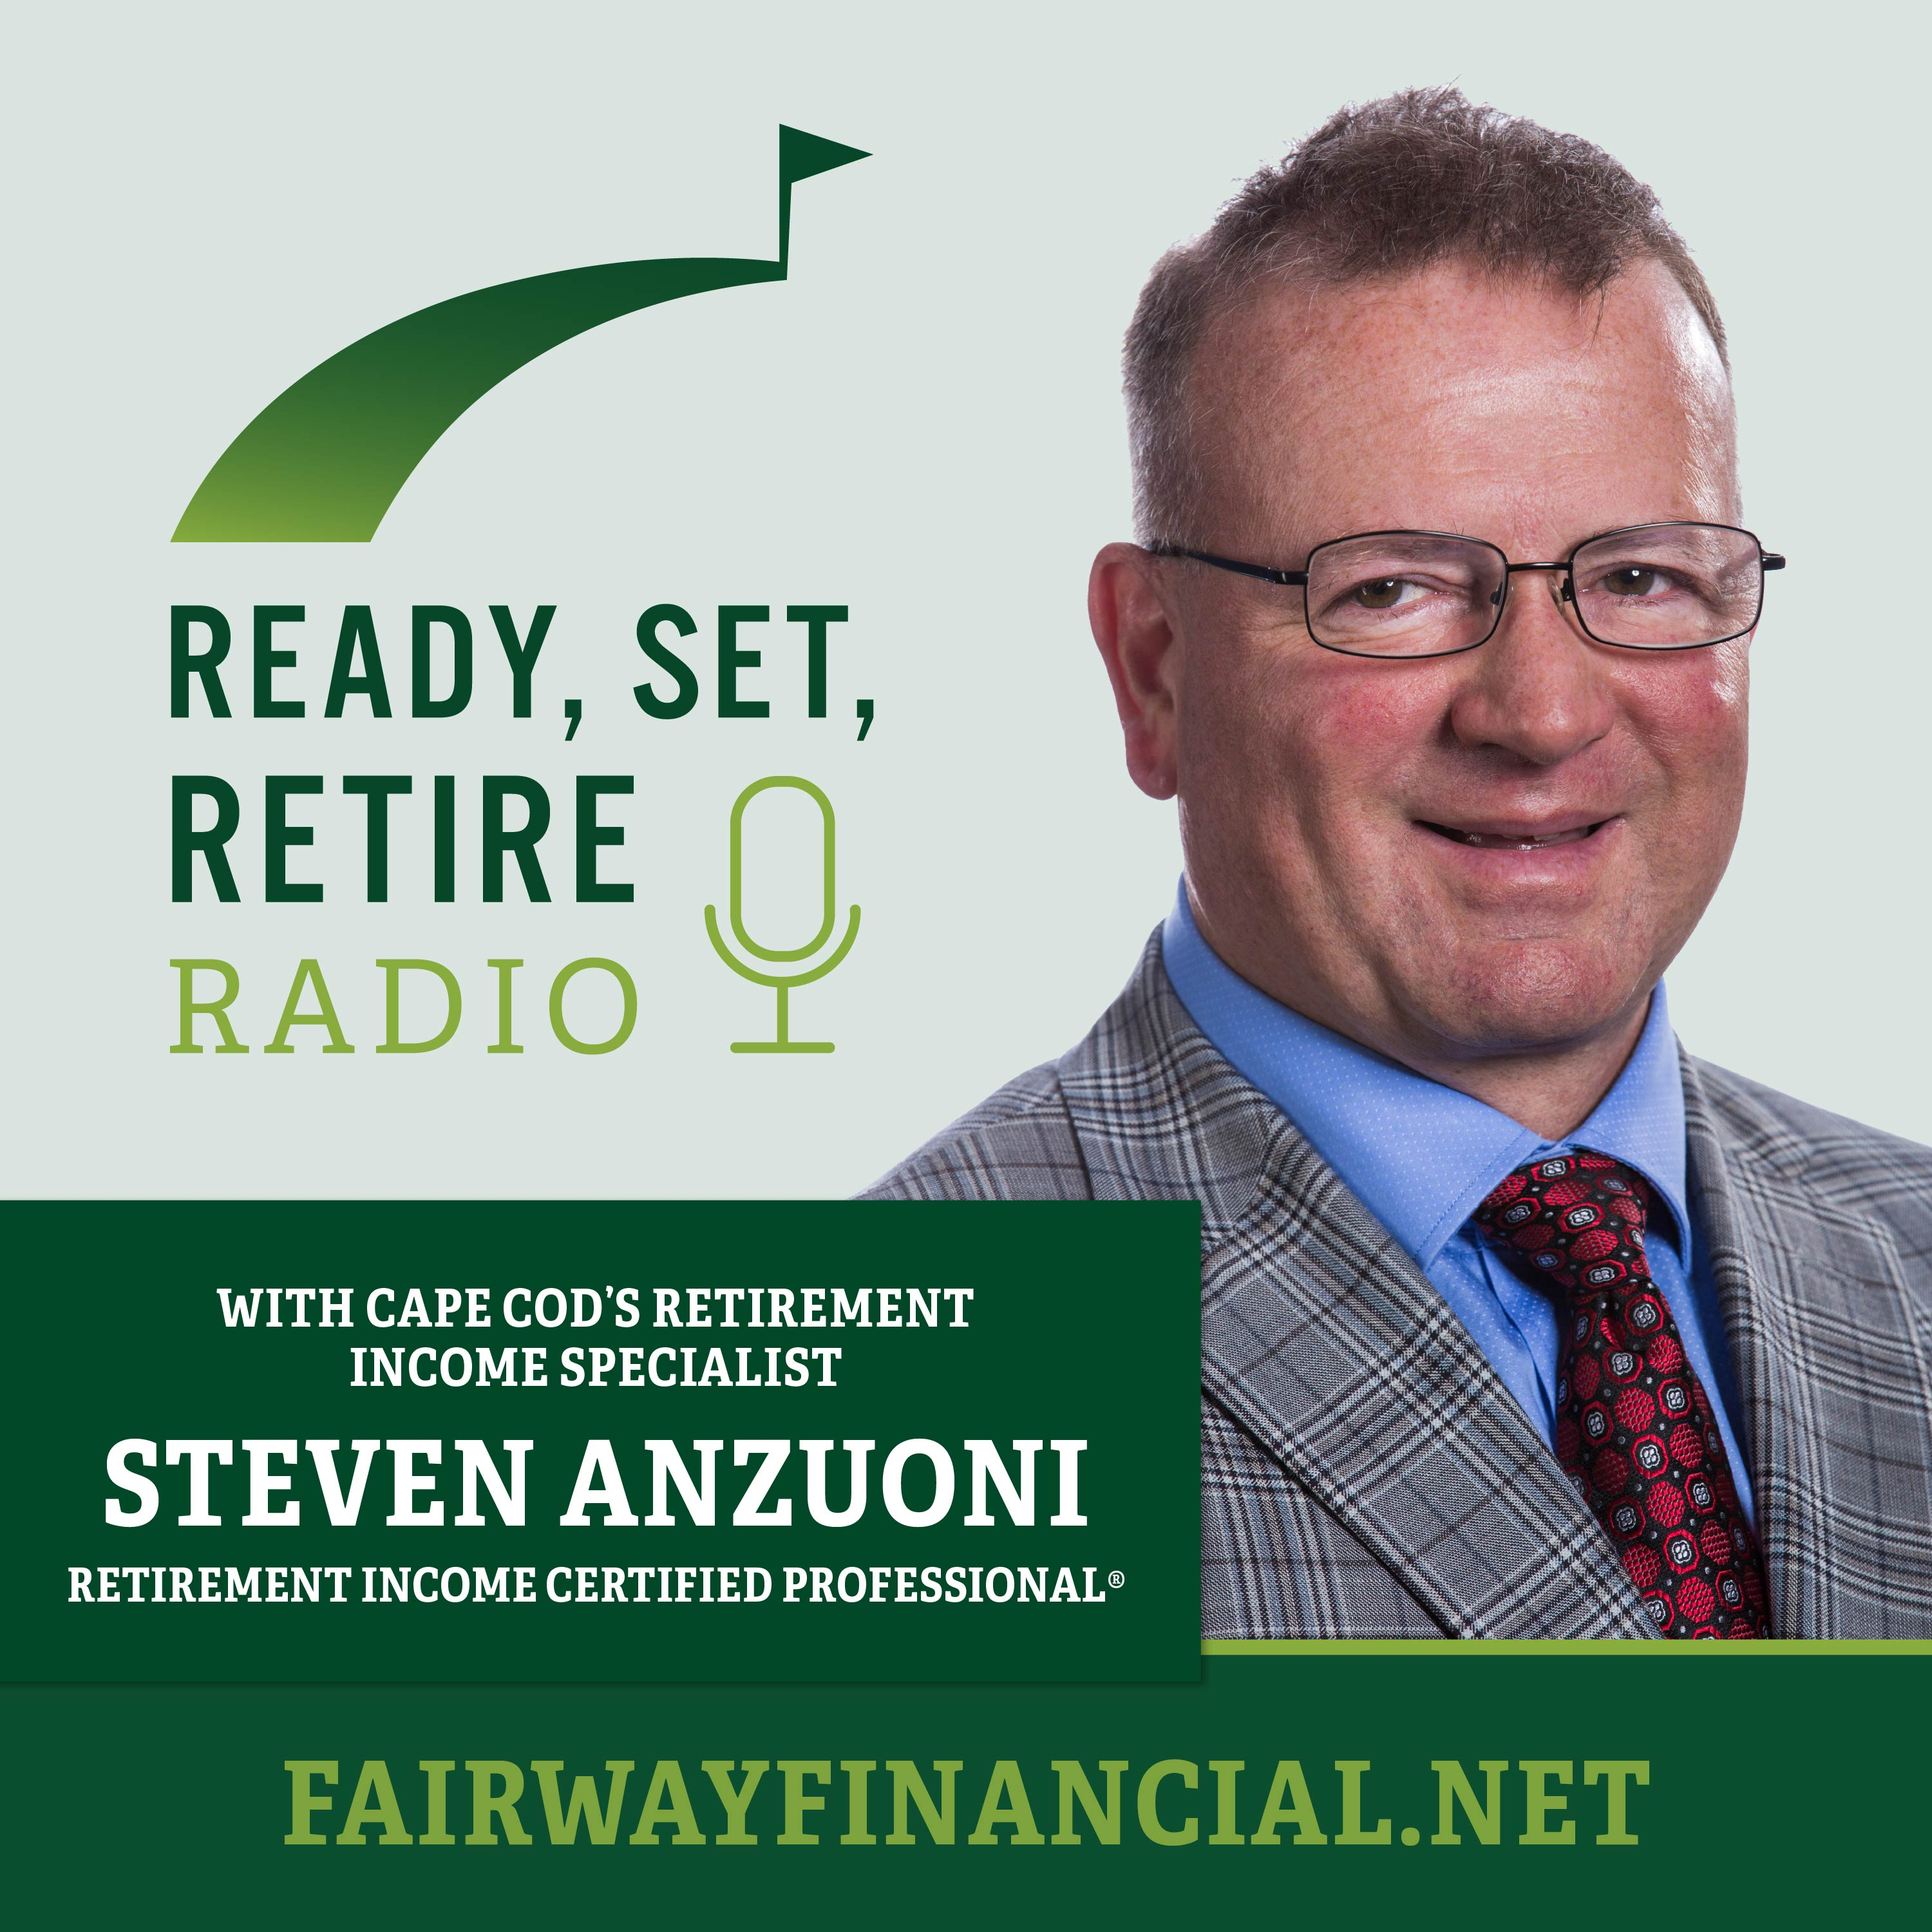 Challenges of Retiring Early